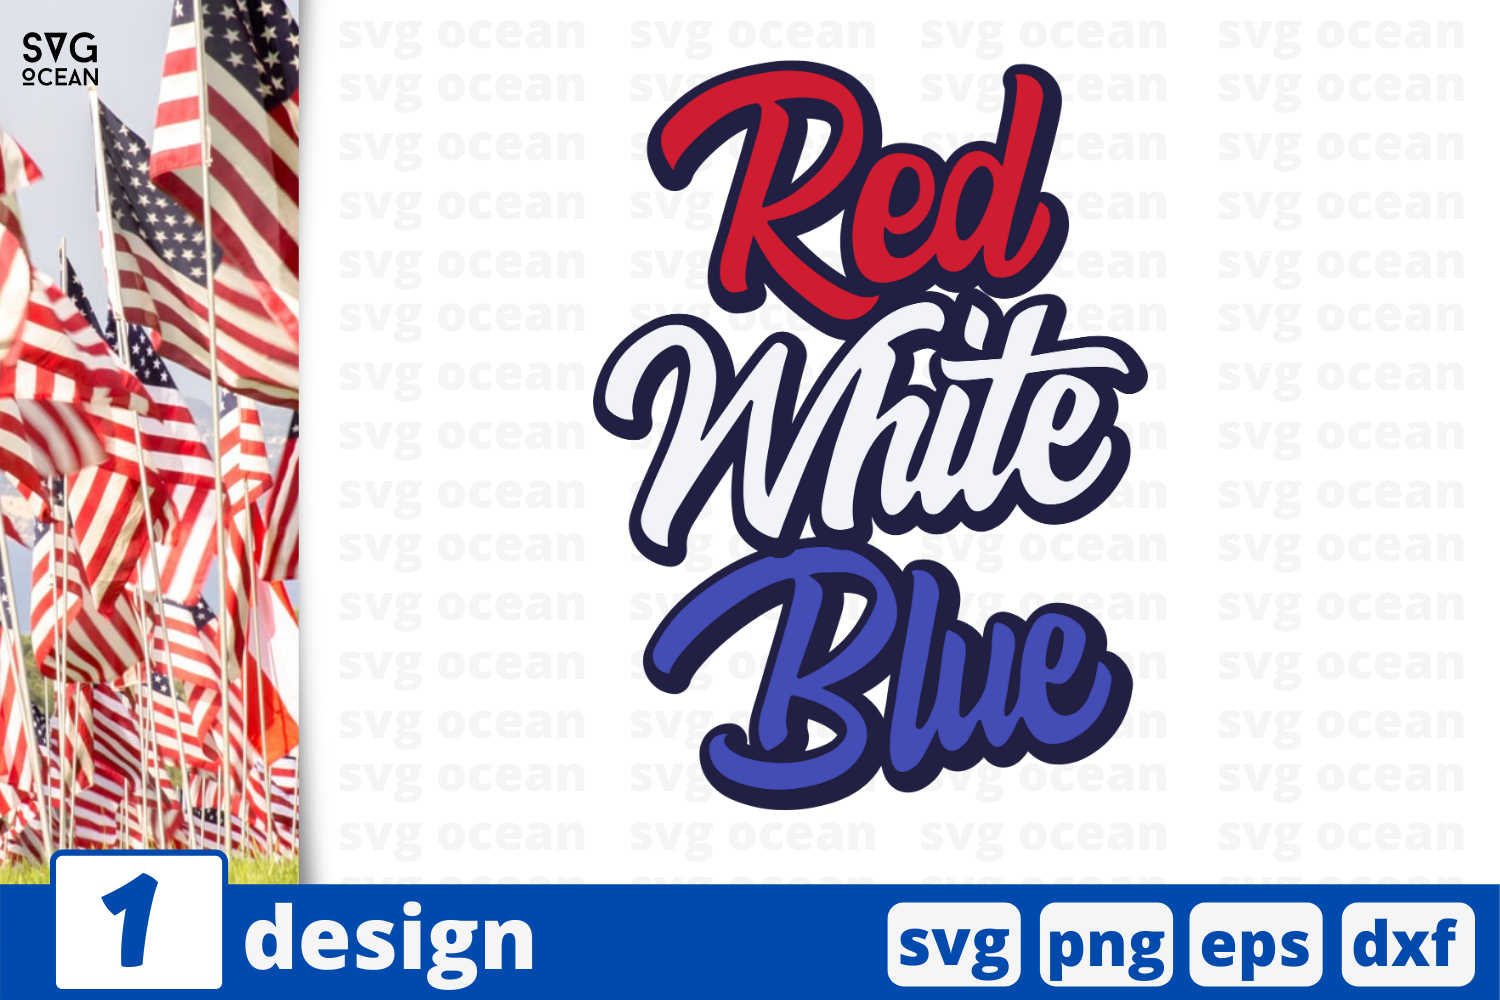 Download 1 Red White Blue Svg Bundle Quotes Cricut Svg By Svgocean Thehungryjpeg Com